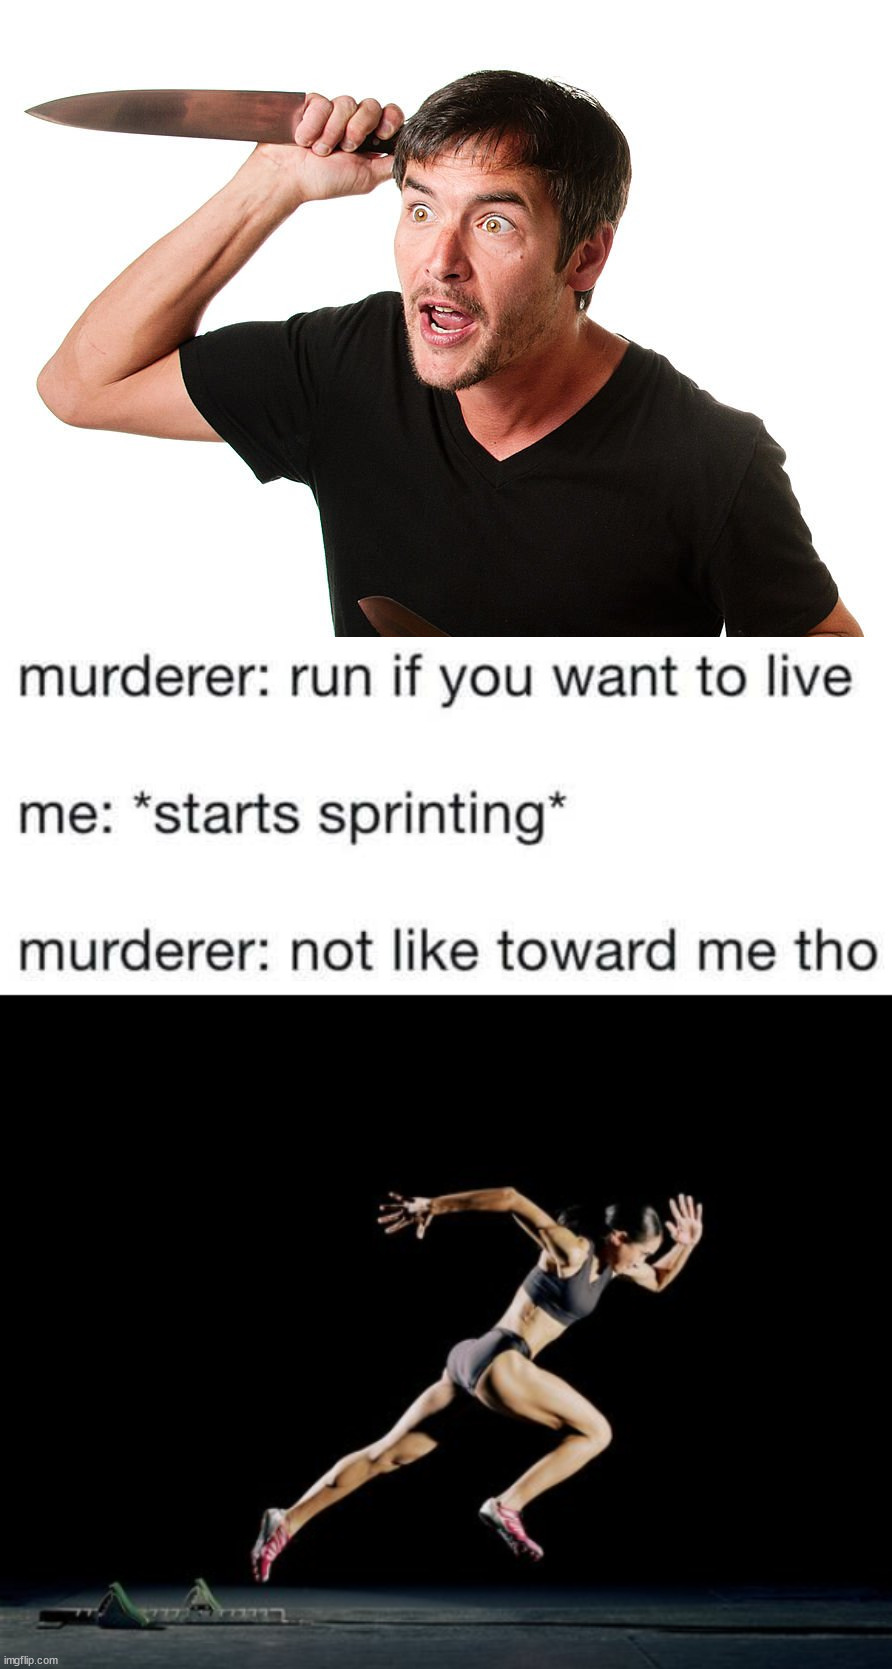 Ending it all | image tagged in sprint,killer,run away | made w/ Imgflip meme maker